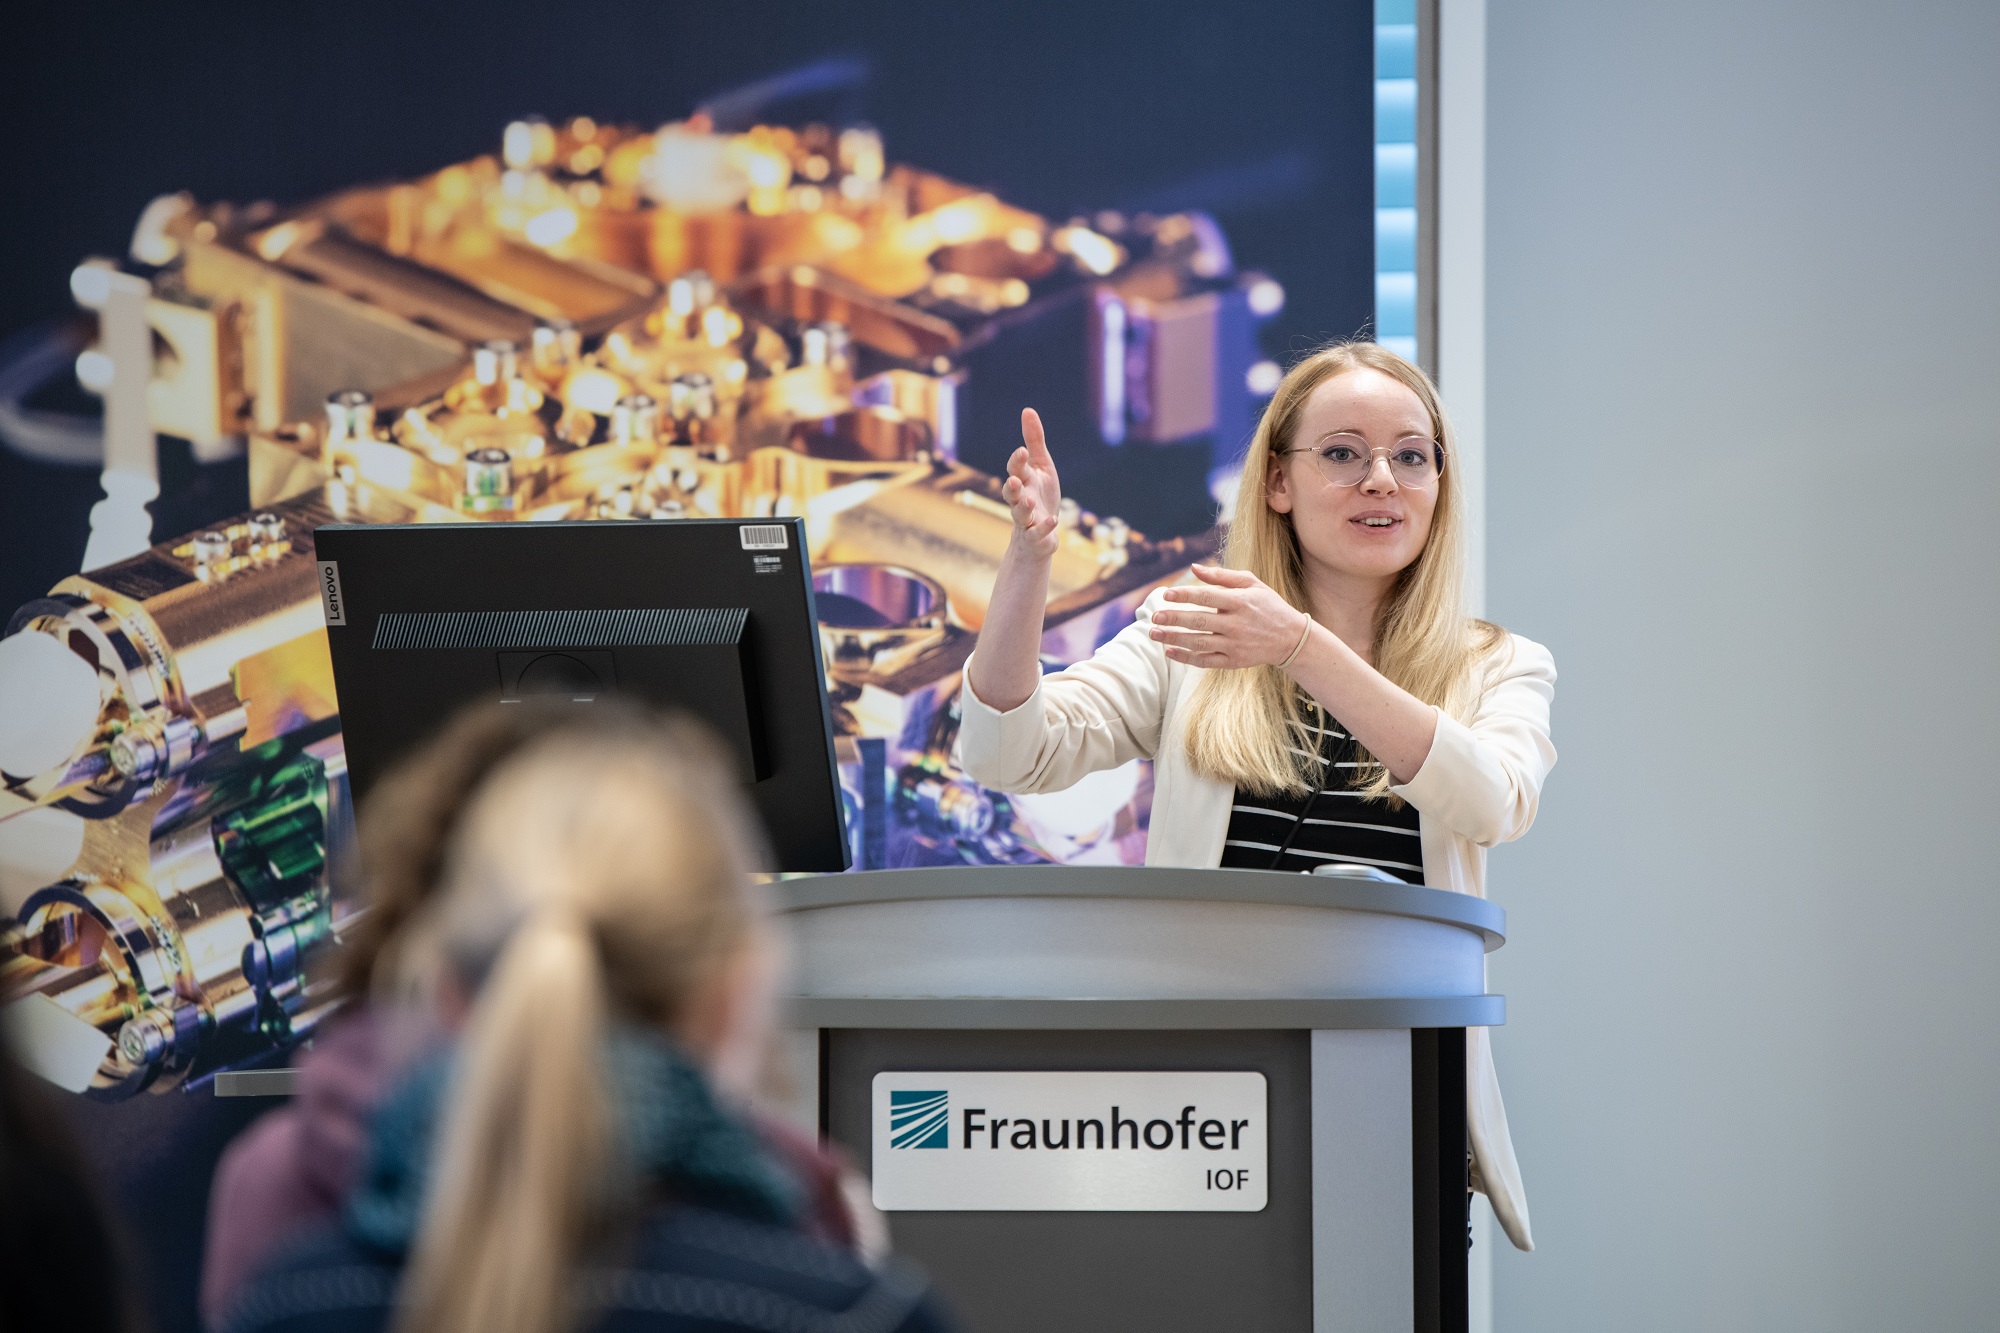 Presentation on job opportunities in the world of qantum and light at Fraunhofer Science campus at Fraunhofer IOF.